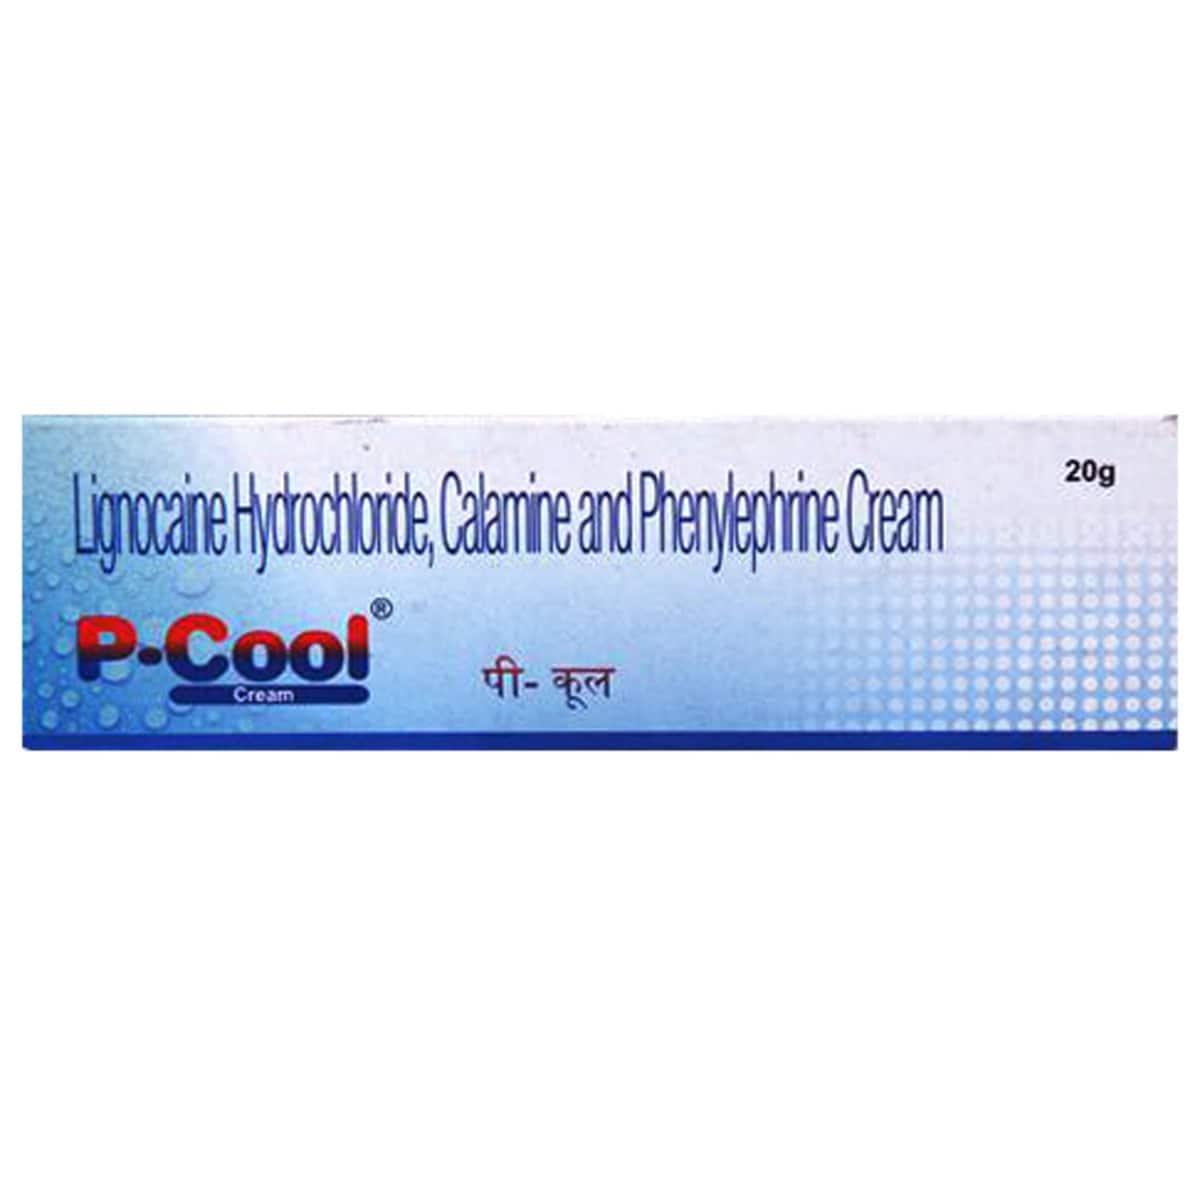 P-Cool Cream 20 gm Price, Uses, Side Effects, Composition - Apollo ...